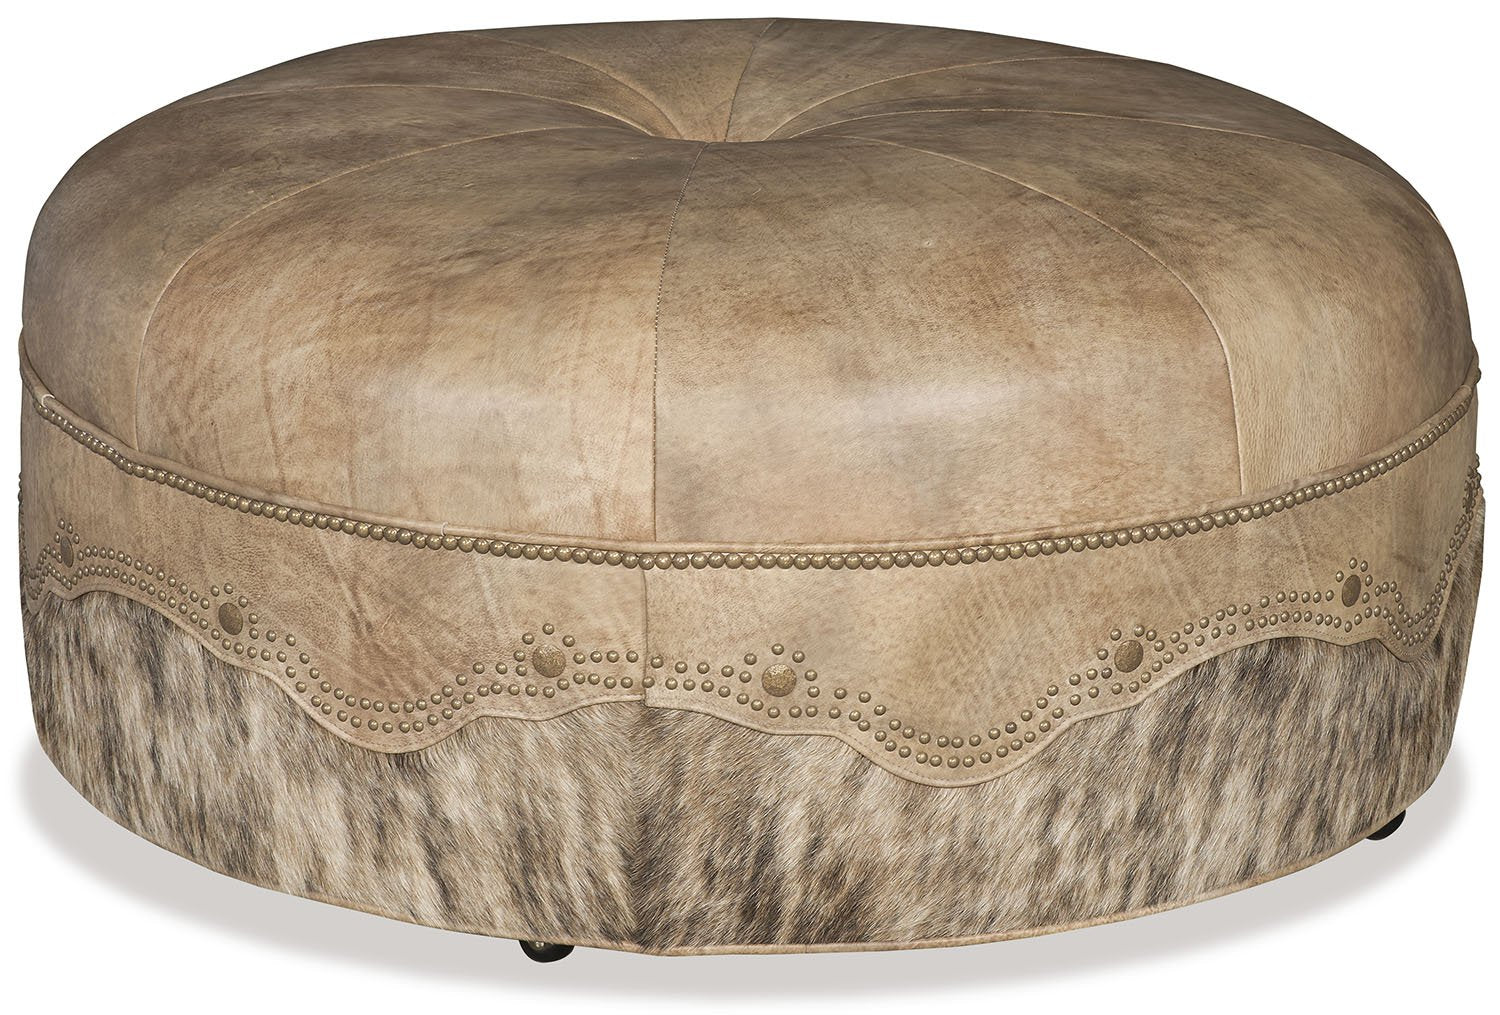 Blonde Cowhide and Leather Ottoman